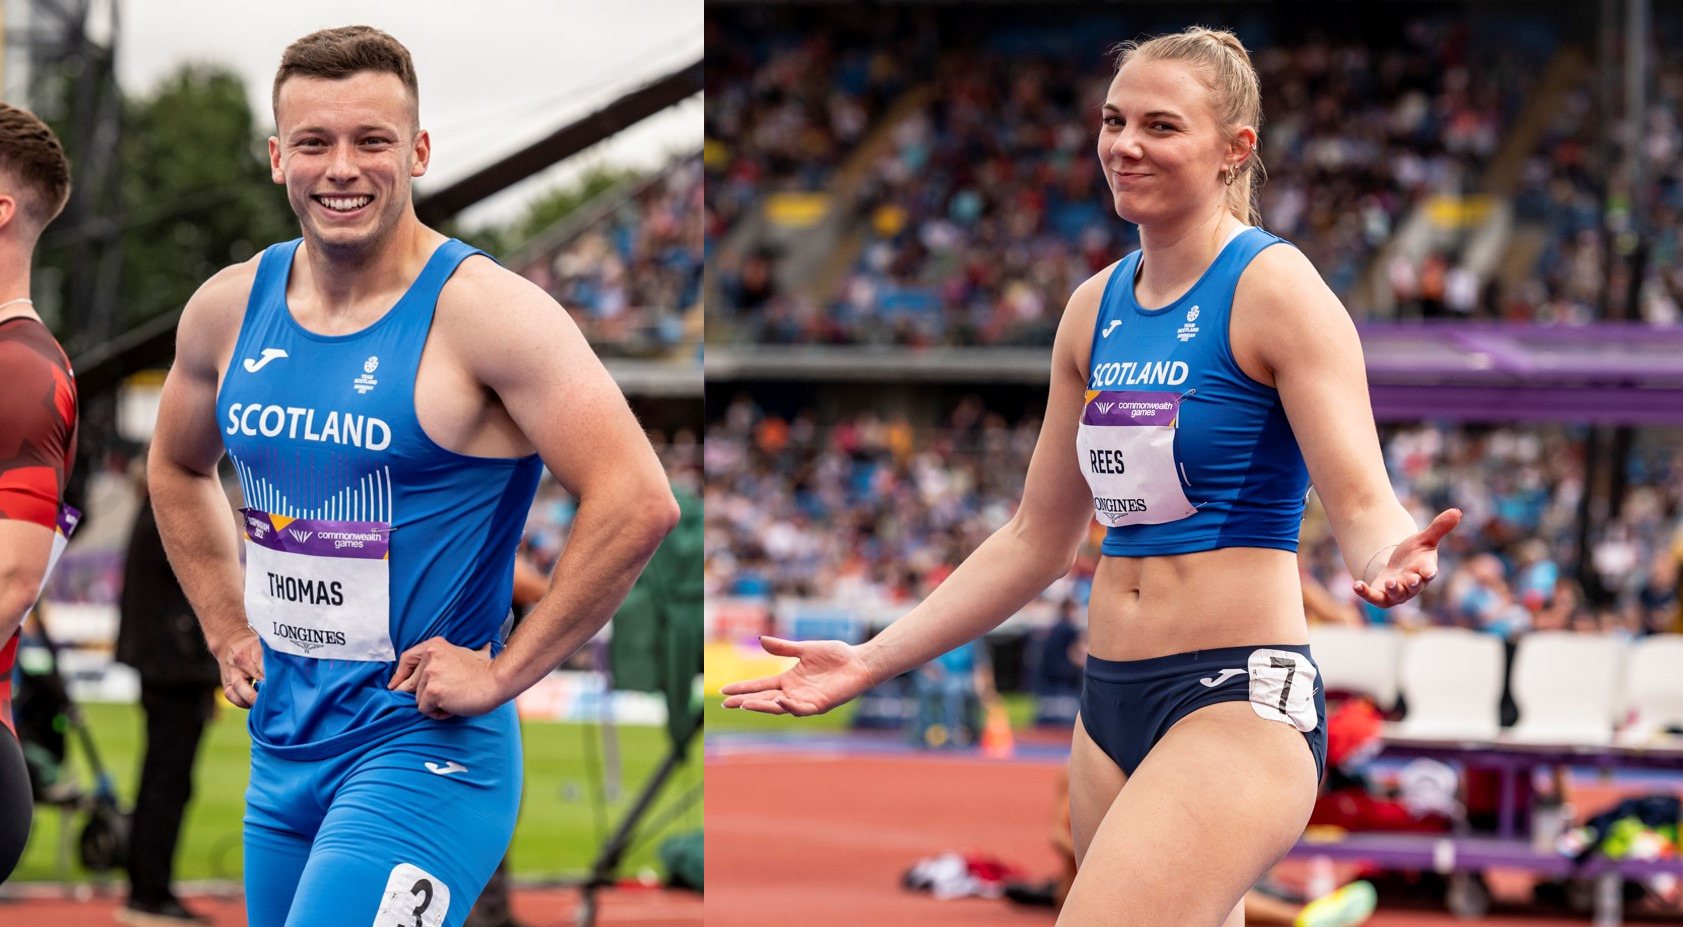 Andy, Kirsty both seventh in finals as sprint pair make semis